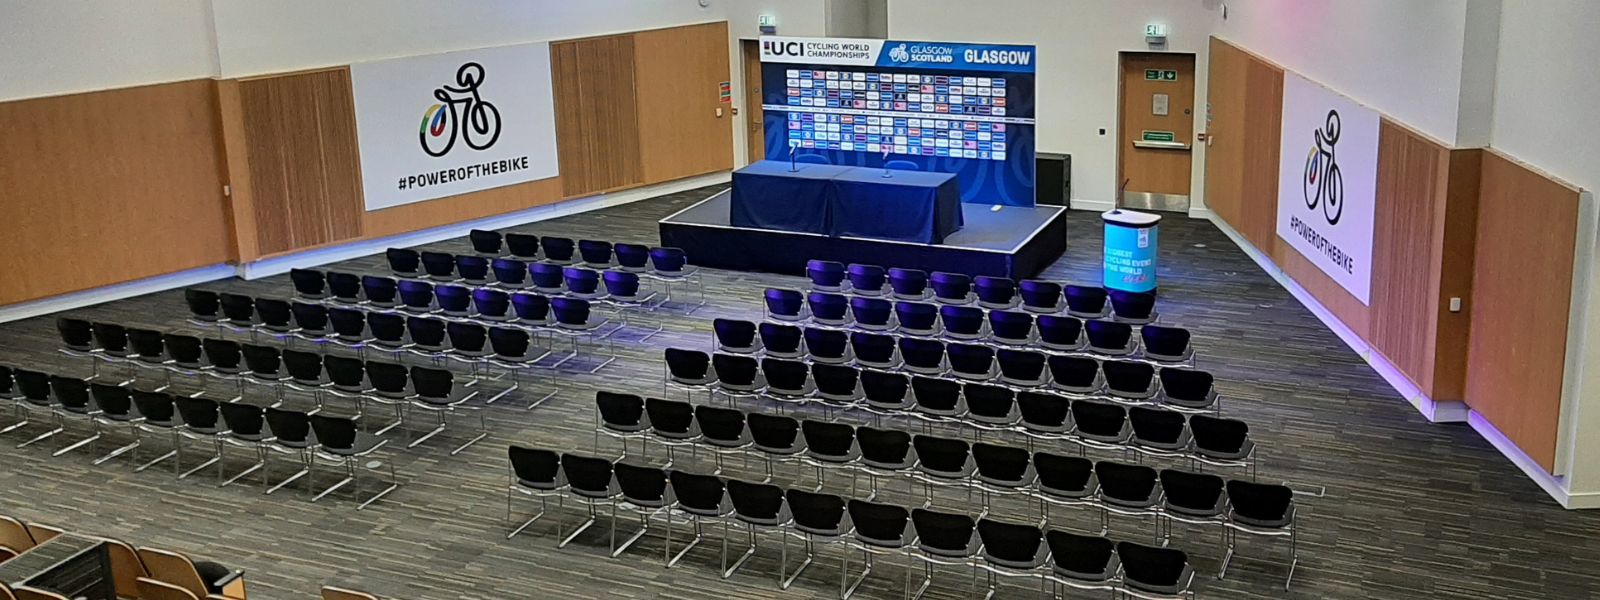 The Technology and Innovation Centre's Main Auditorium set for UCI press conference